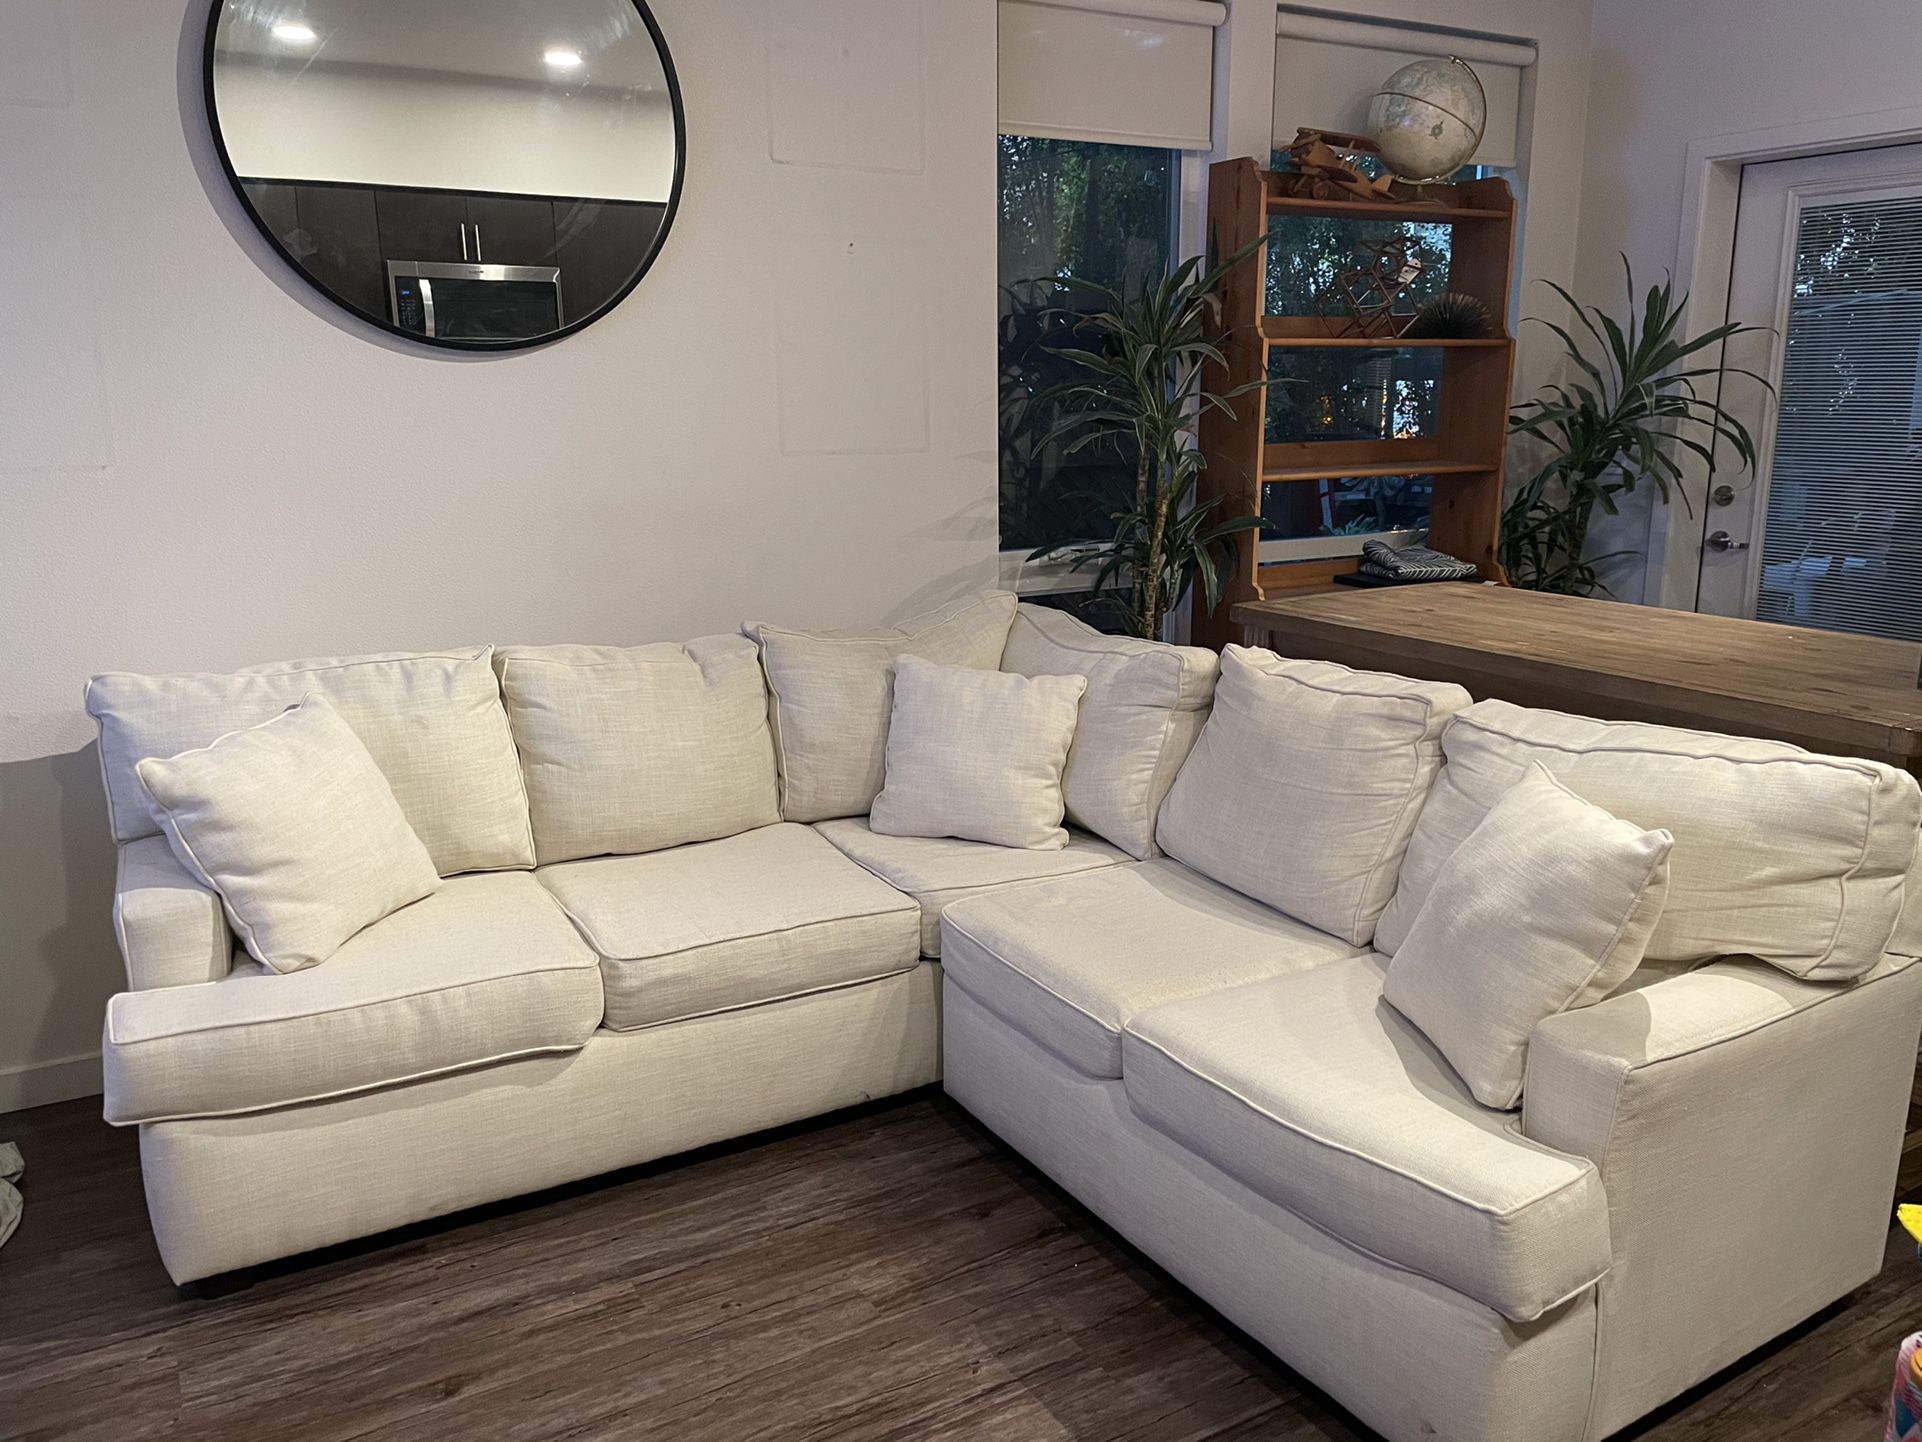 Pending Pickup - Free White Sectional